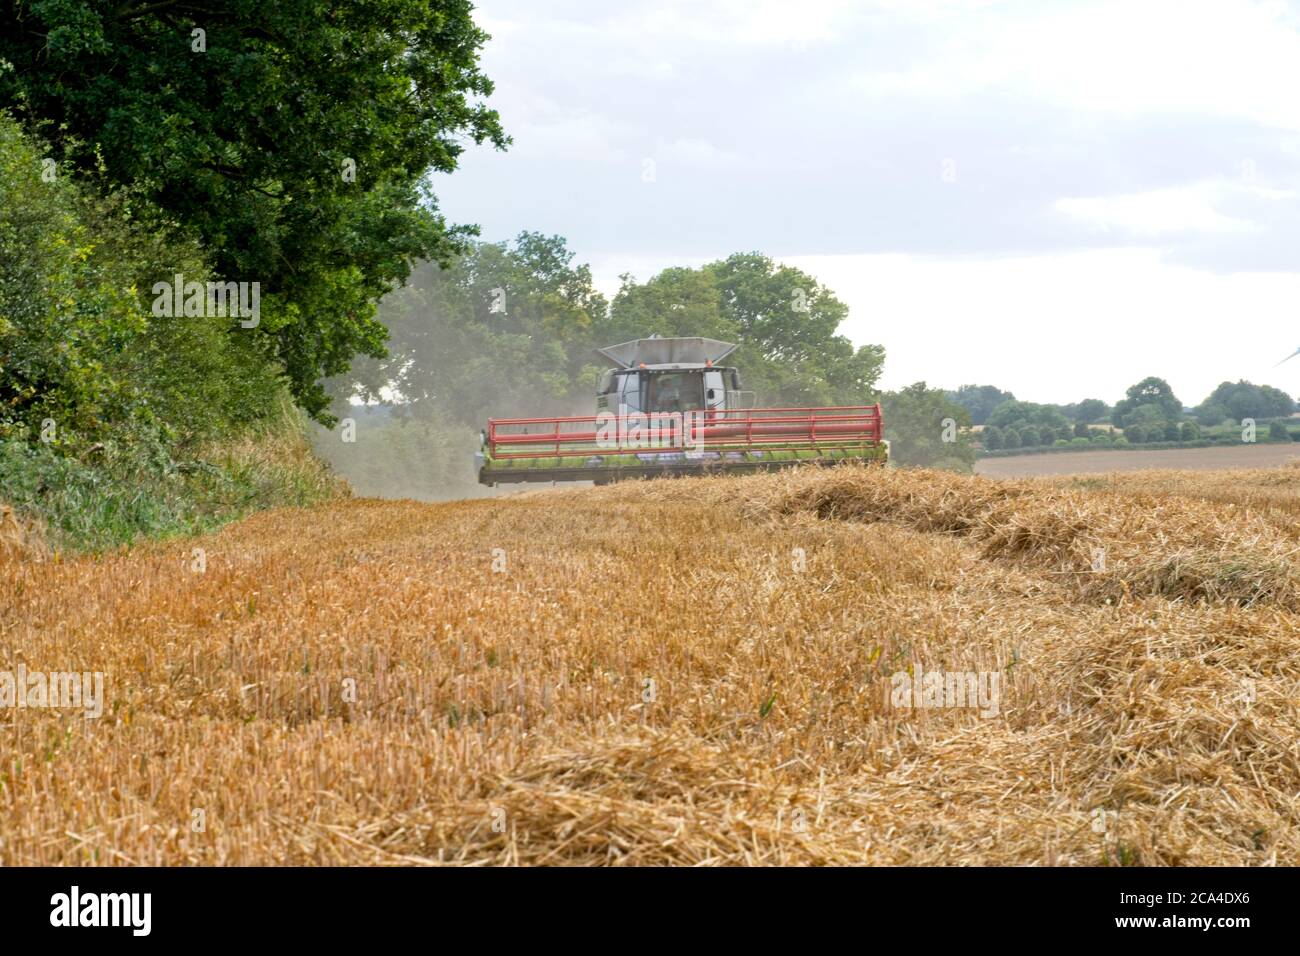 Winter Harvest Frontal view of harvester approaching camera Crop and stubble in field Cloudy sky Trees lining field Landscape format Stock Photo